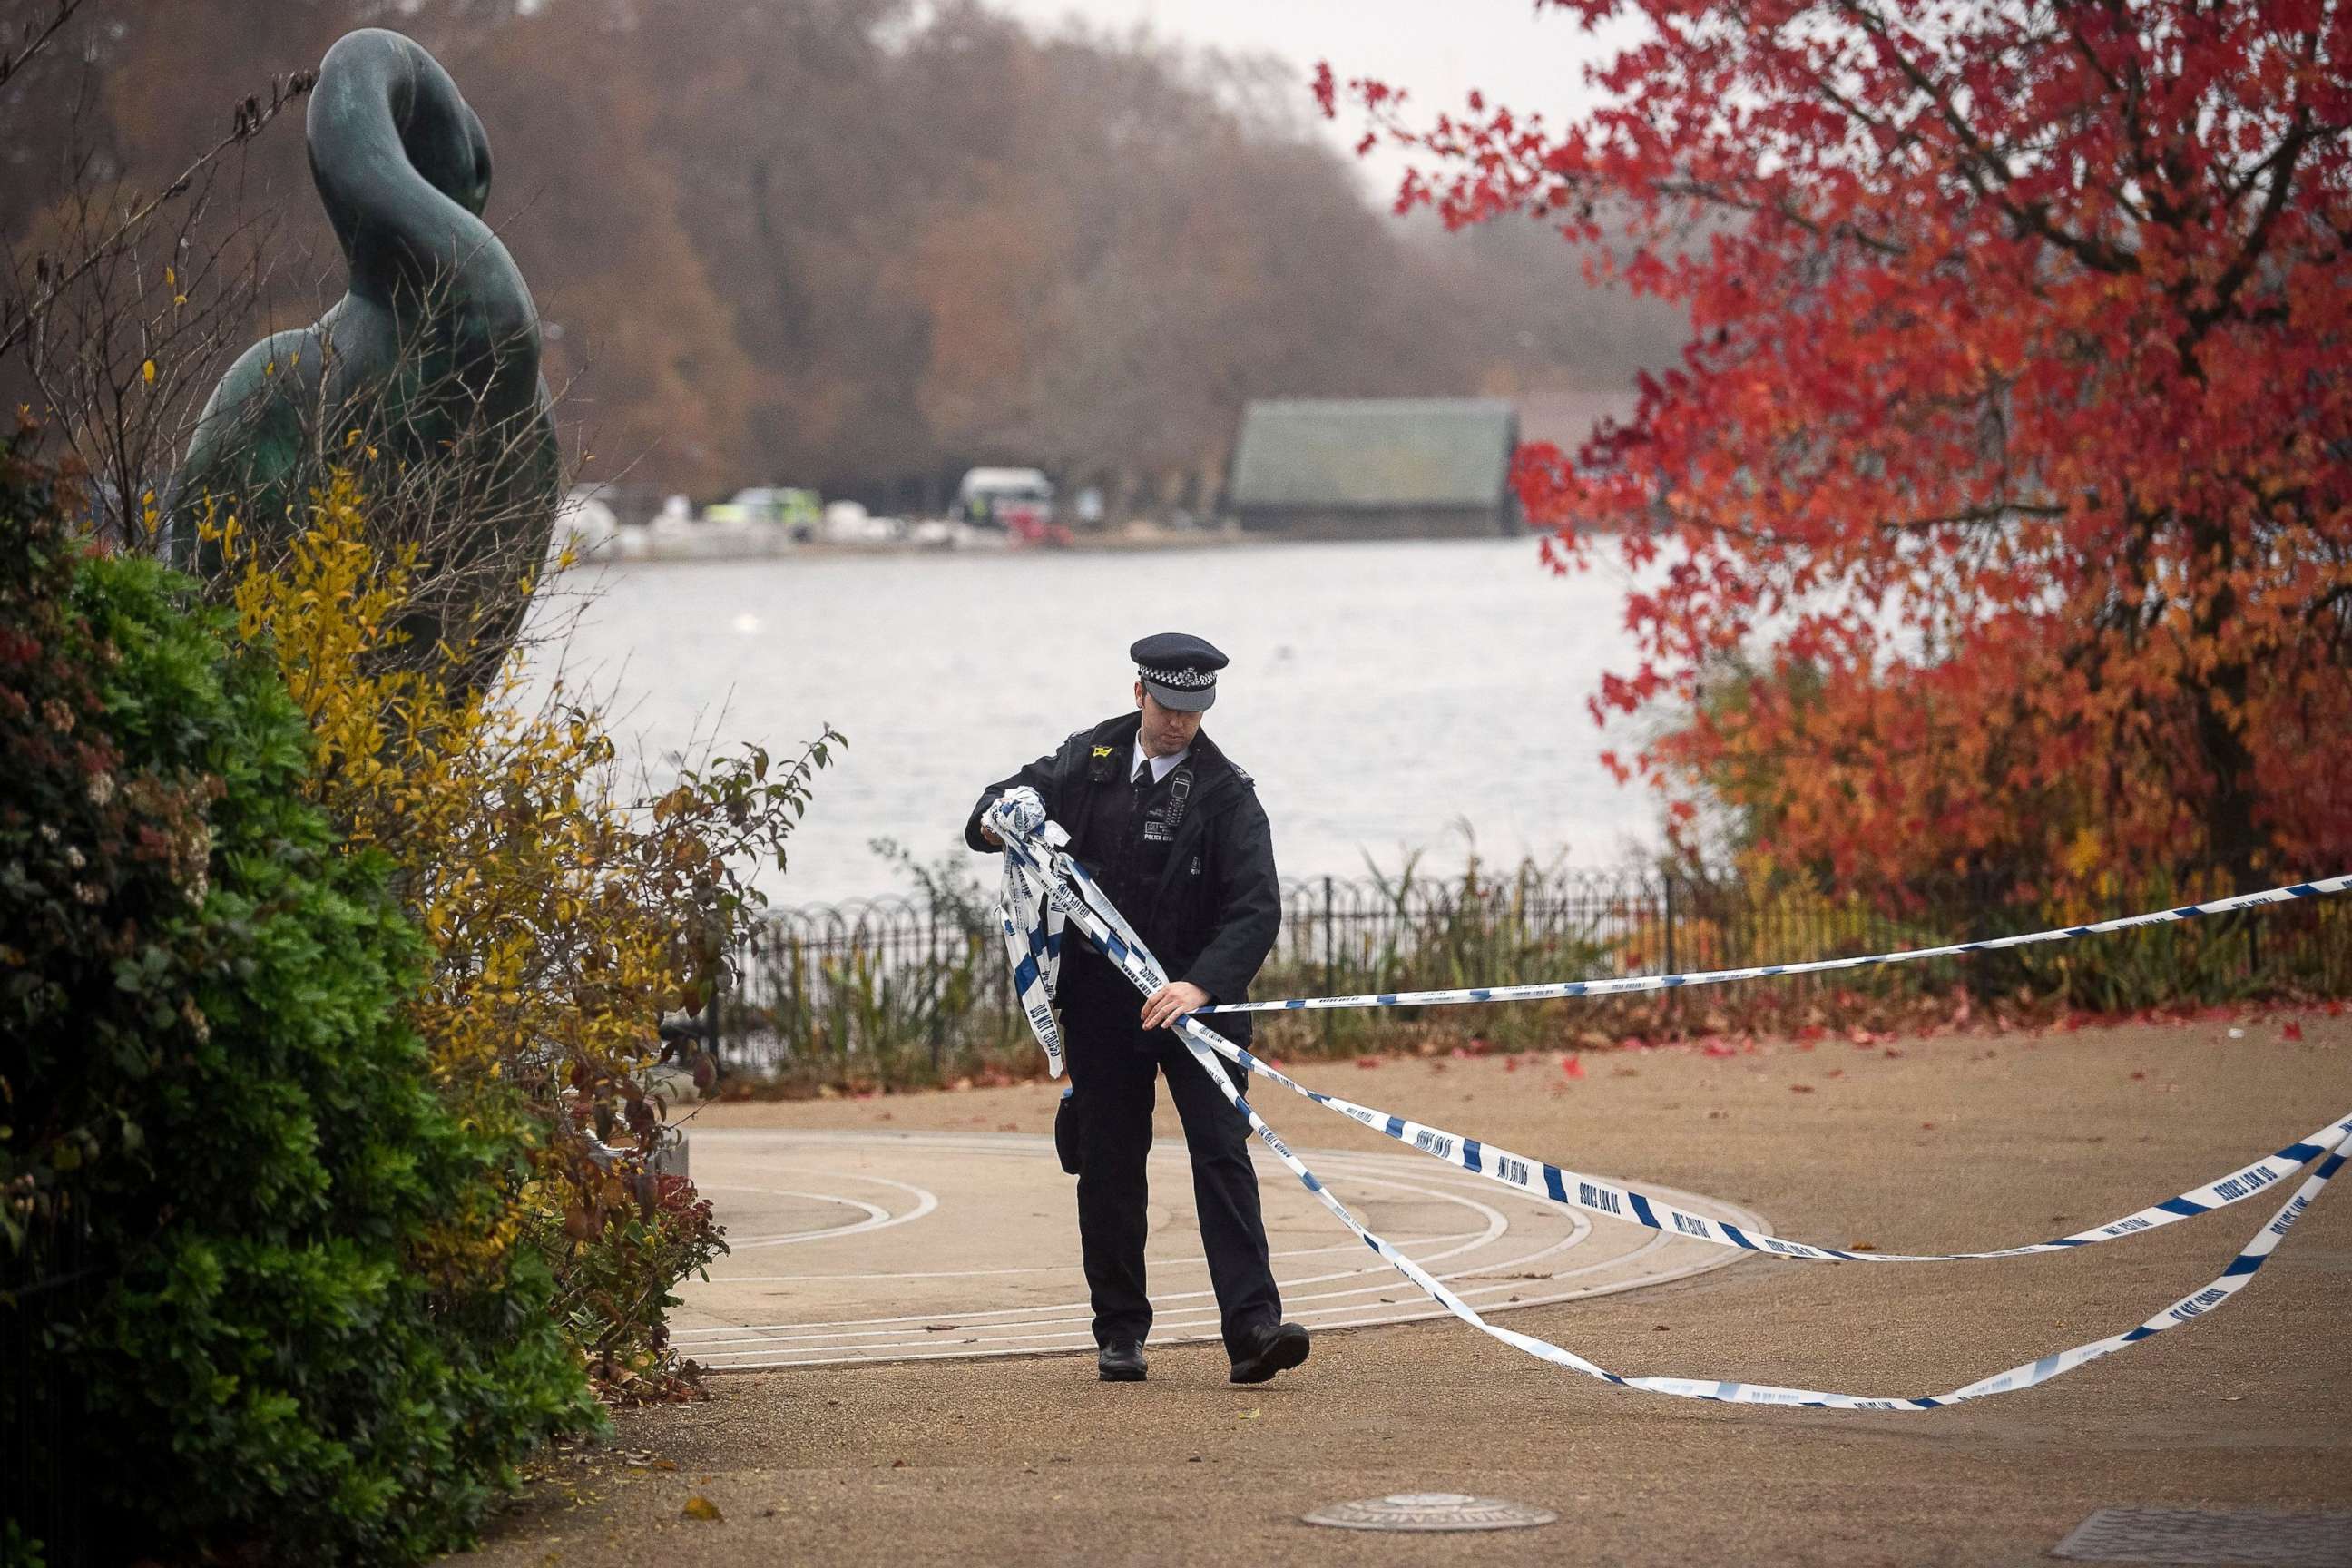 PHOTO: Police set up a cordon around the Serpentine Lake in Hyde Park in London following reports of the discovery of an object that could be unexploded ordnance, Nov. 16, 2018.